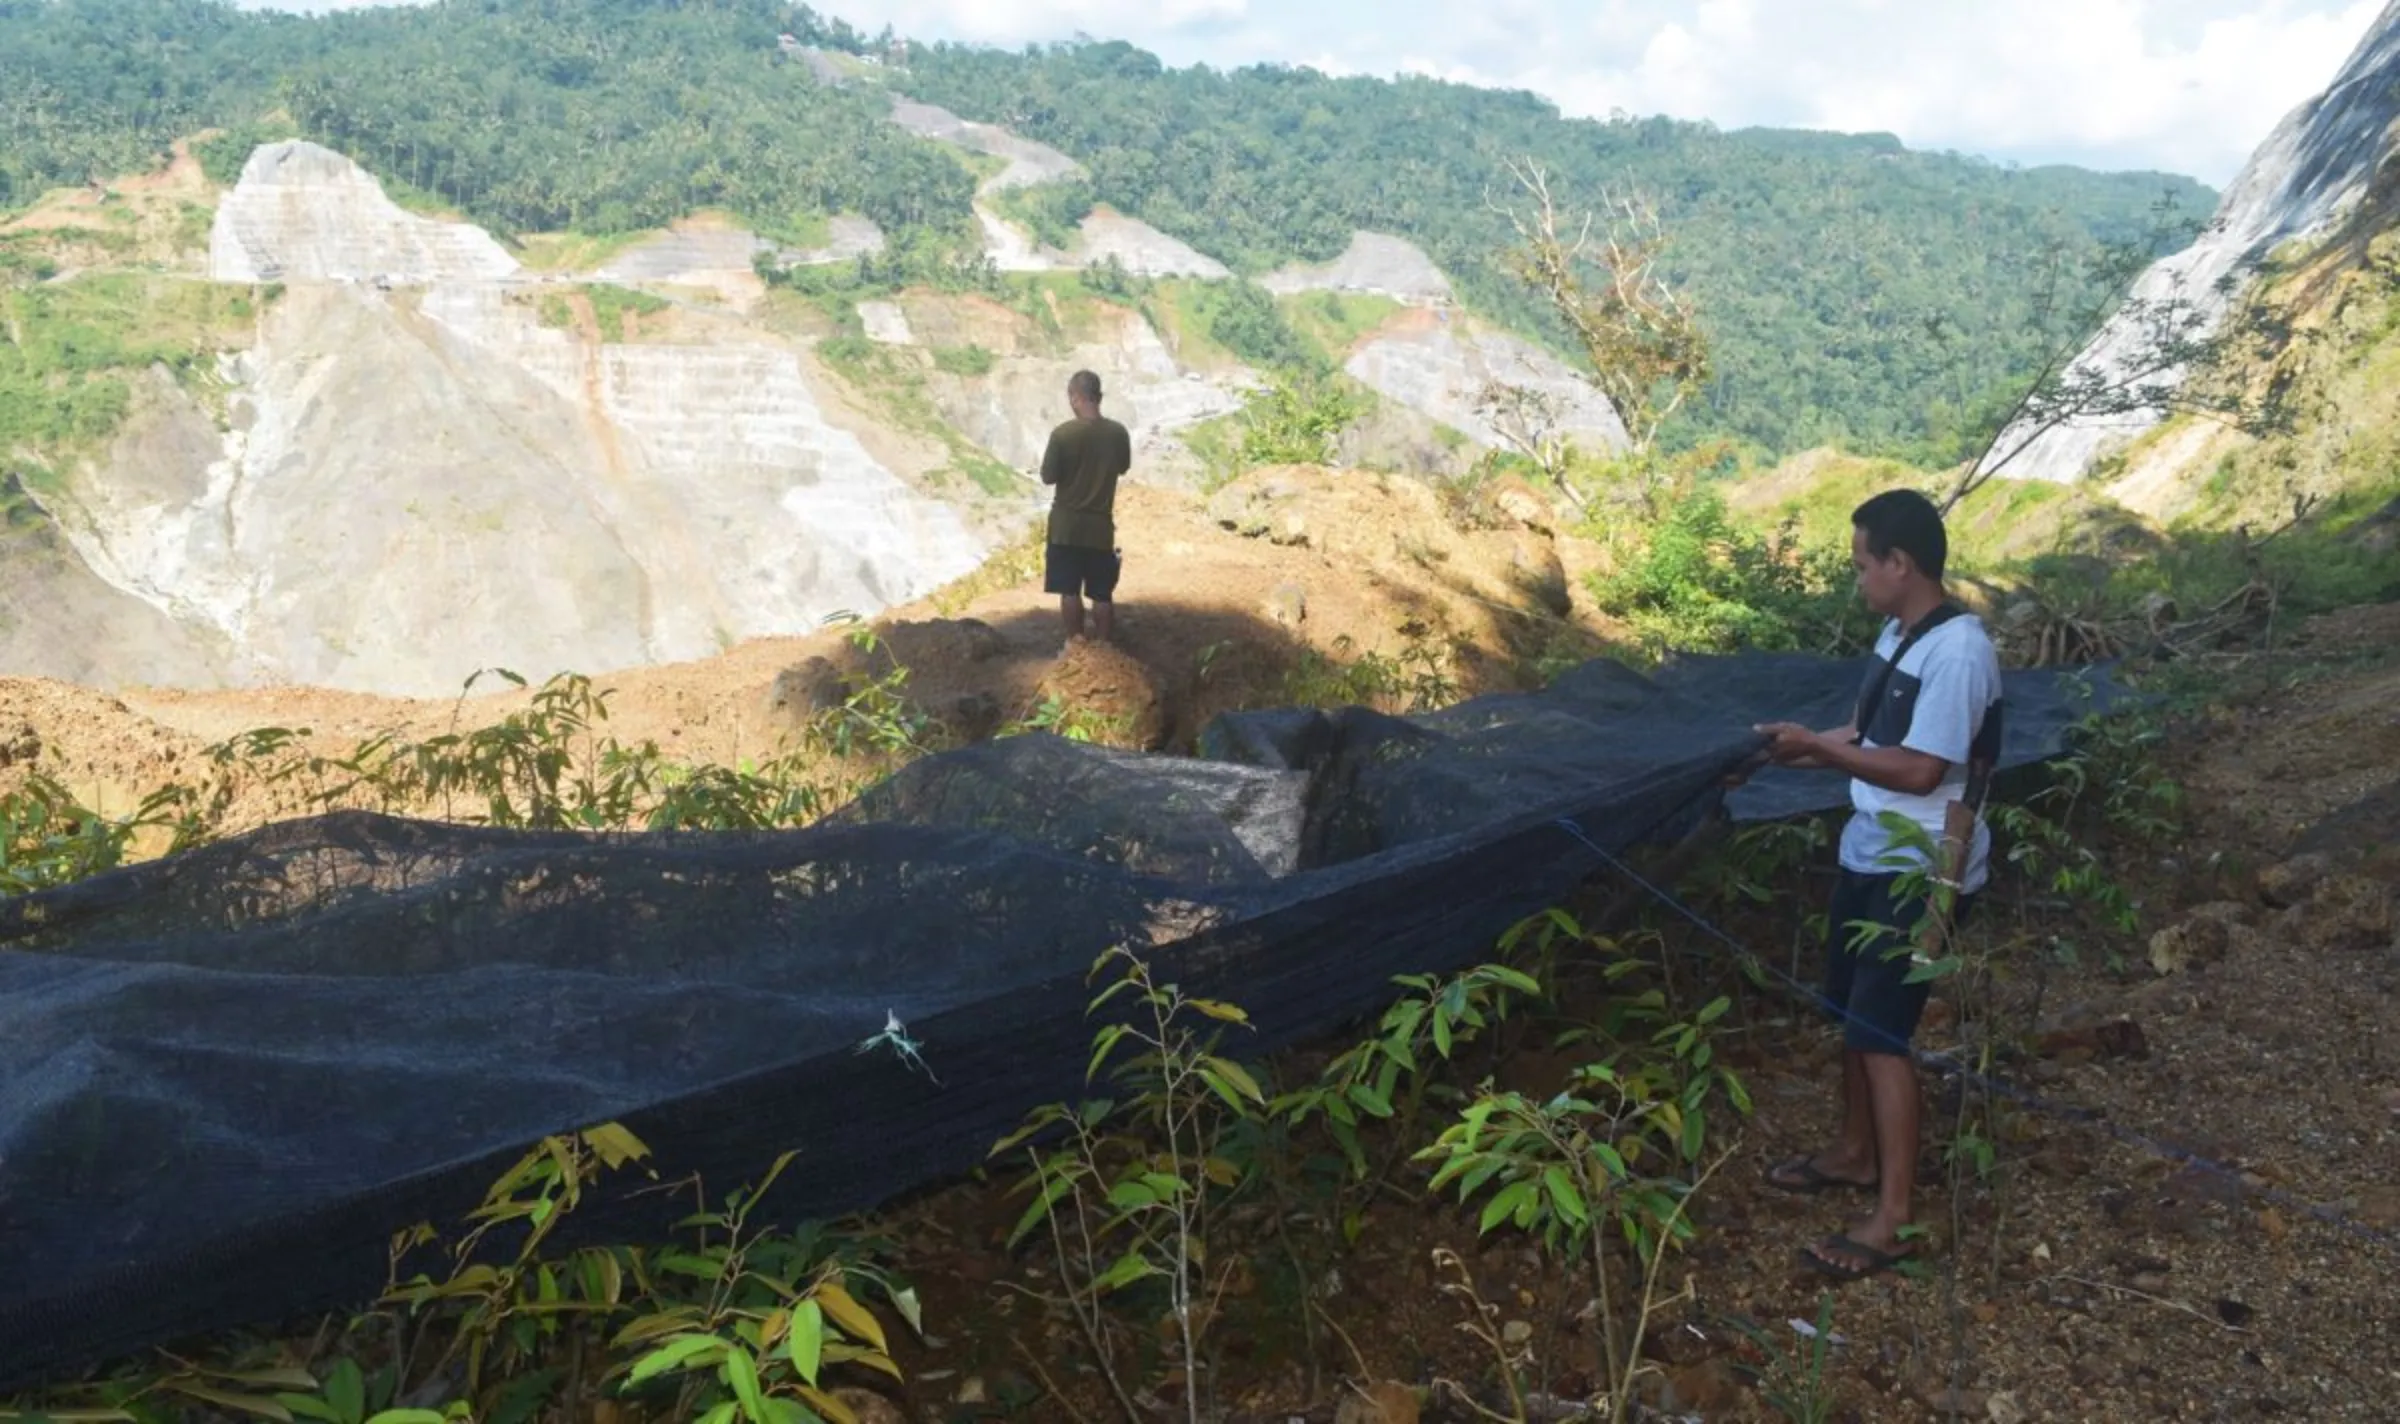 Gunawan installing nets to protect the plant seeds on his land which had been eroded by the Bener Dam project in Guntur, Purworejo Regency, Indonesia, December 18, 2022. Thomson Reuters Foundation/Asad Asnawi.